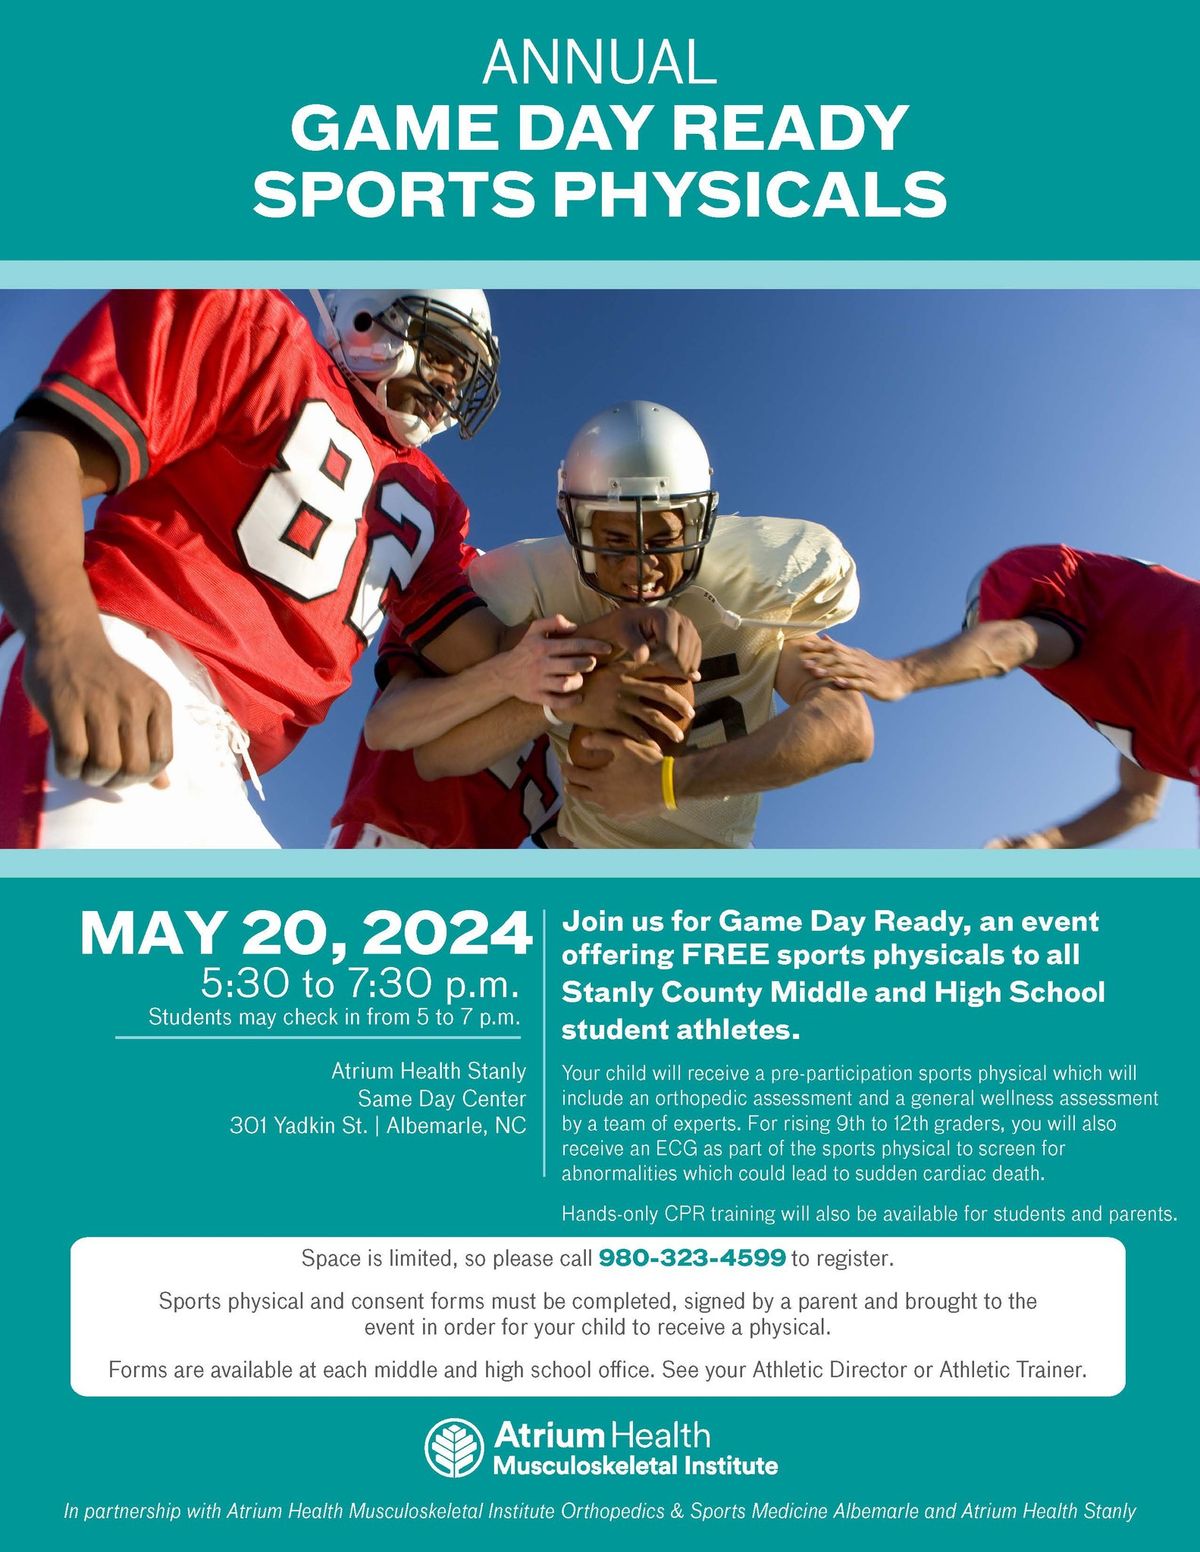 Game Day Ready - FREE Sports Physicals